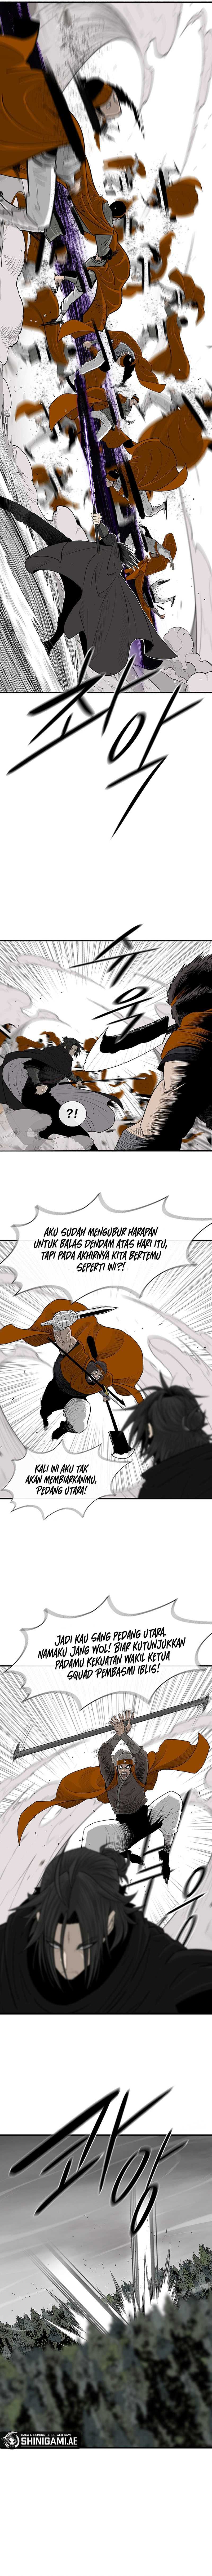 Legend of the Northern Blade Chapter 167